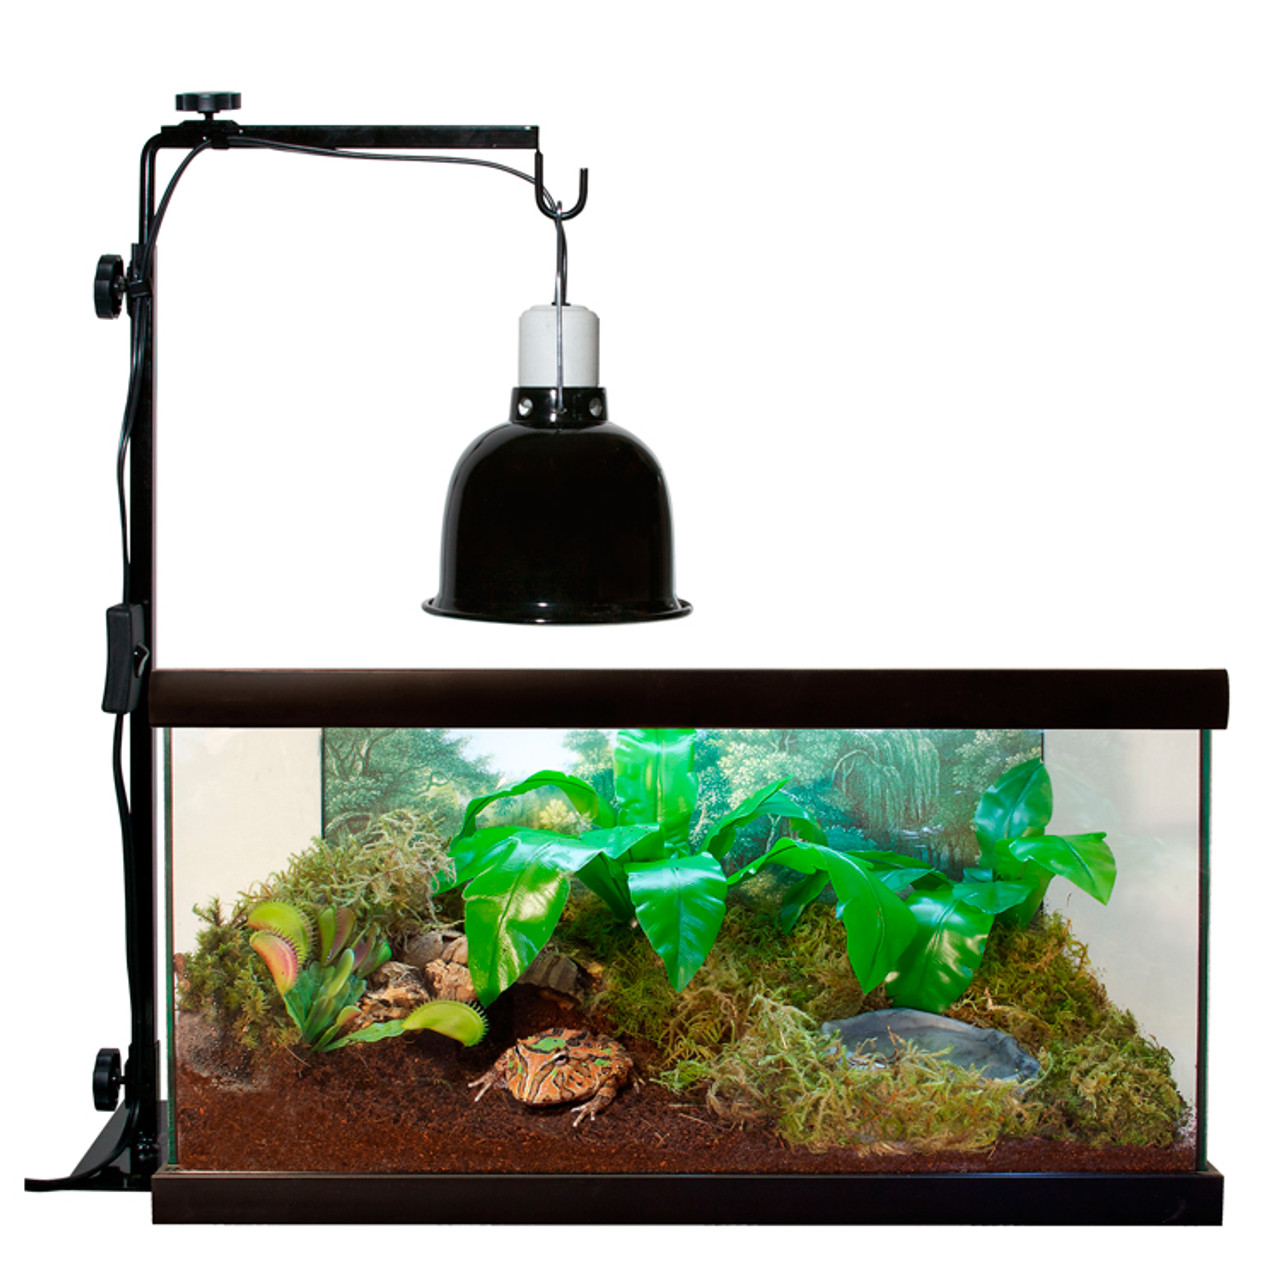 Zoo Med Deep Dome Lamp Fixture